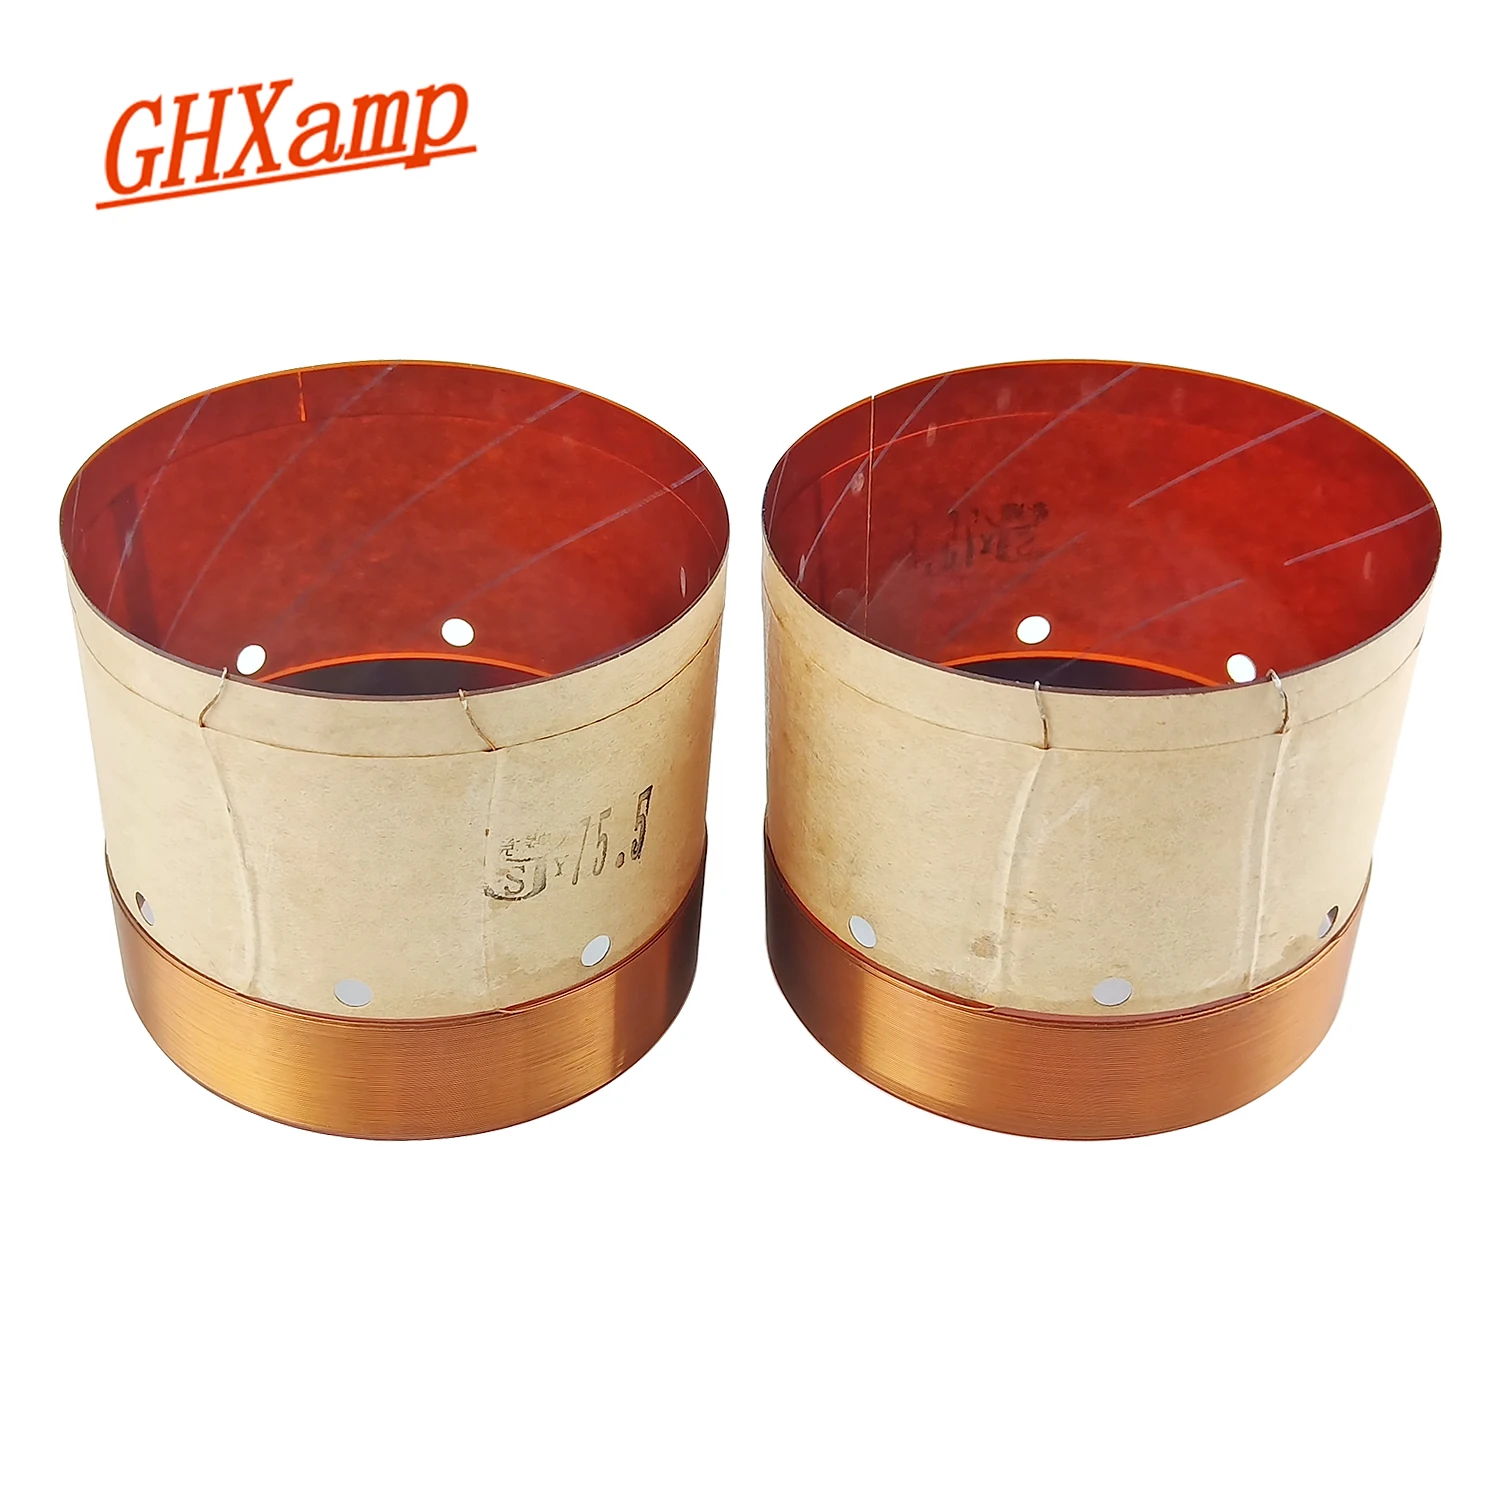 

GHXAMP 75.5mm Bass Speaker Voice Coil KSV Round Wire 75.5 Core 8ohm Woofer Cail Repair Subwoofer Speaker Accessories Diy 2pcs